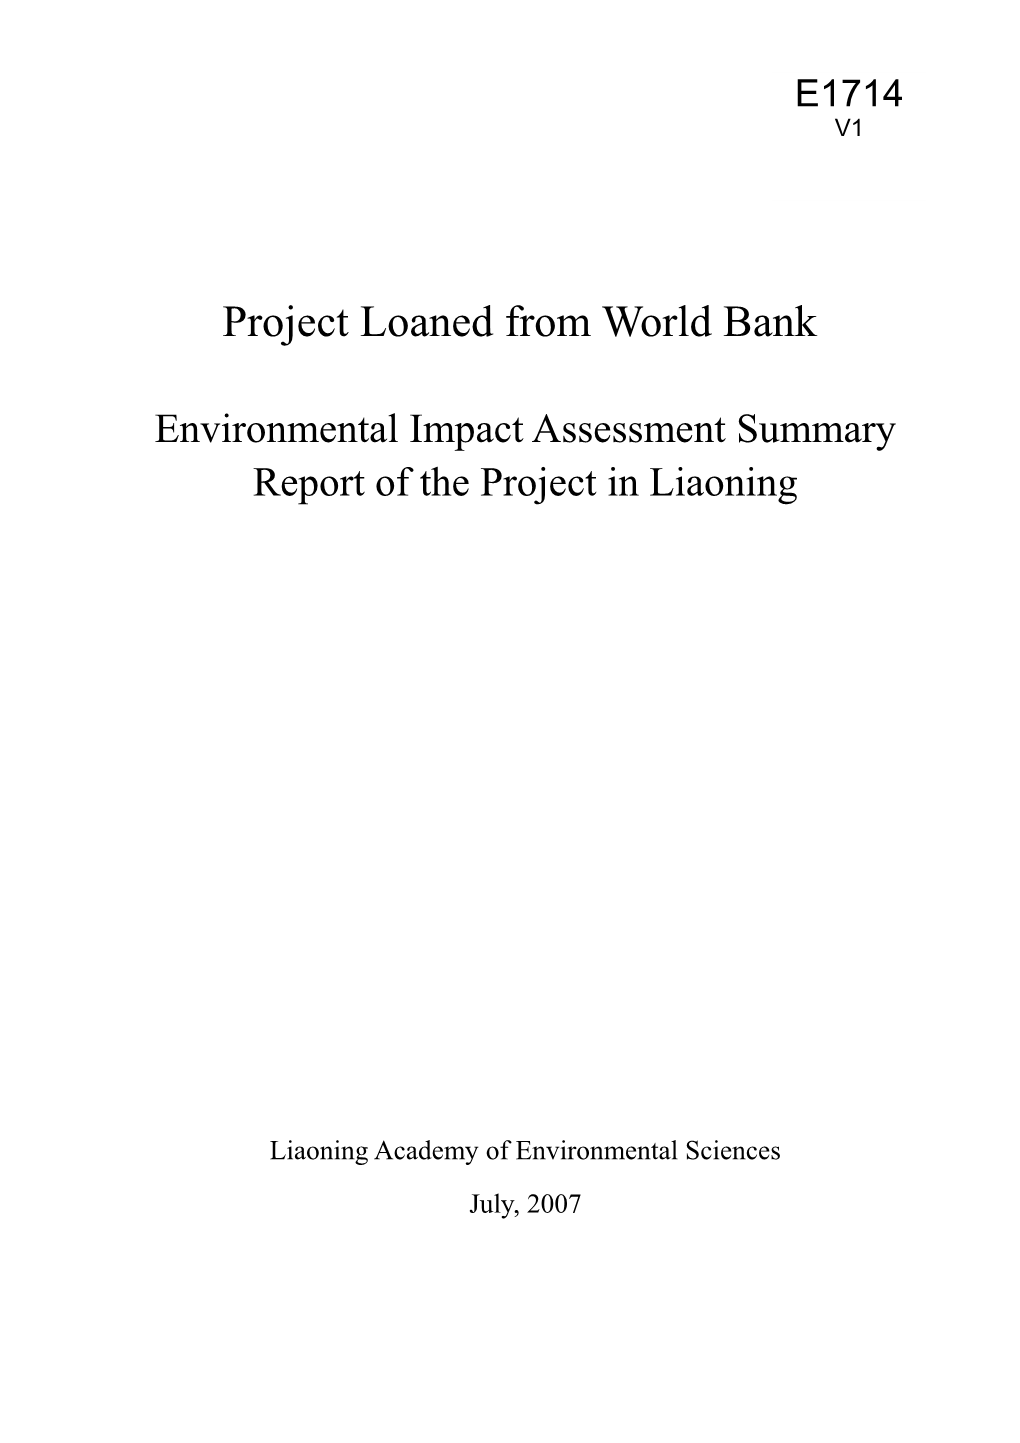 World Bank Funded Project